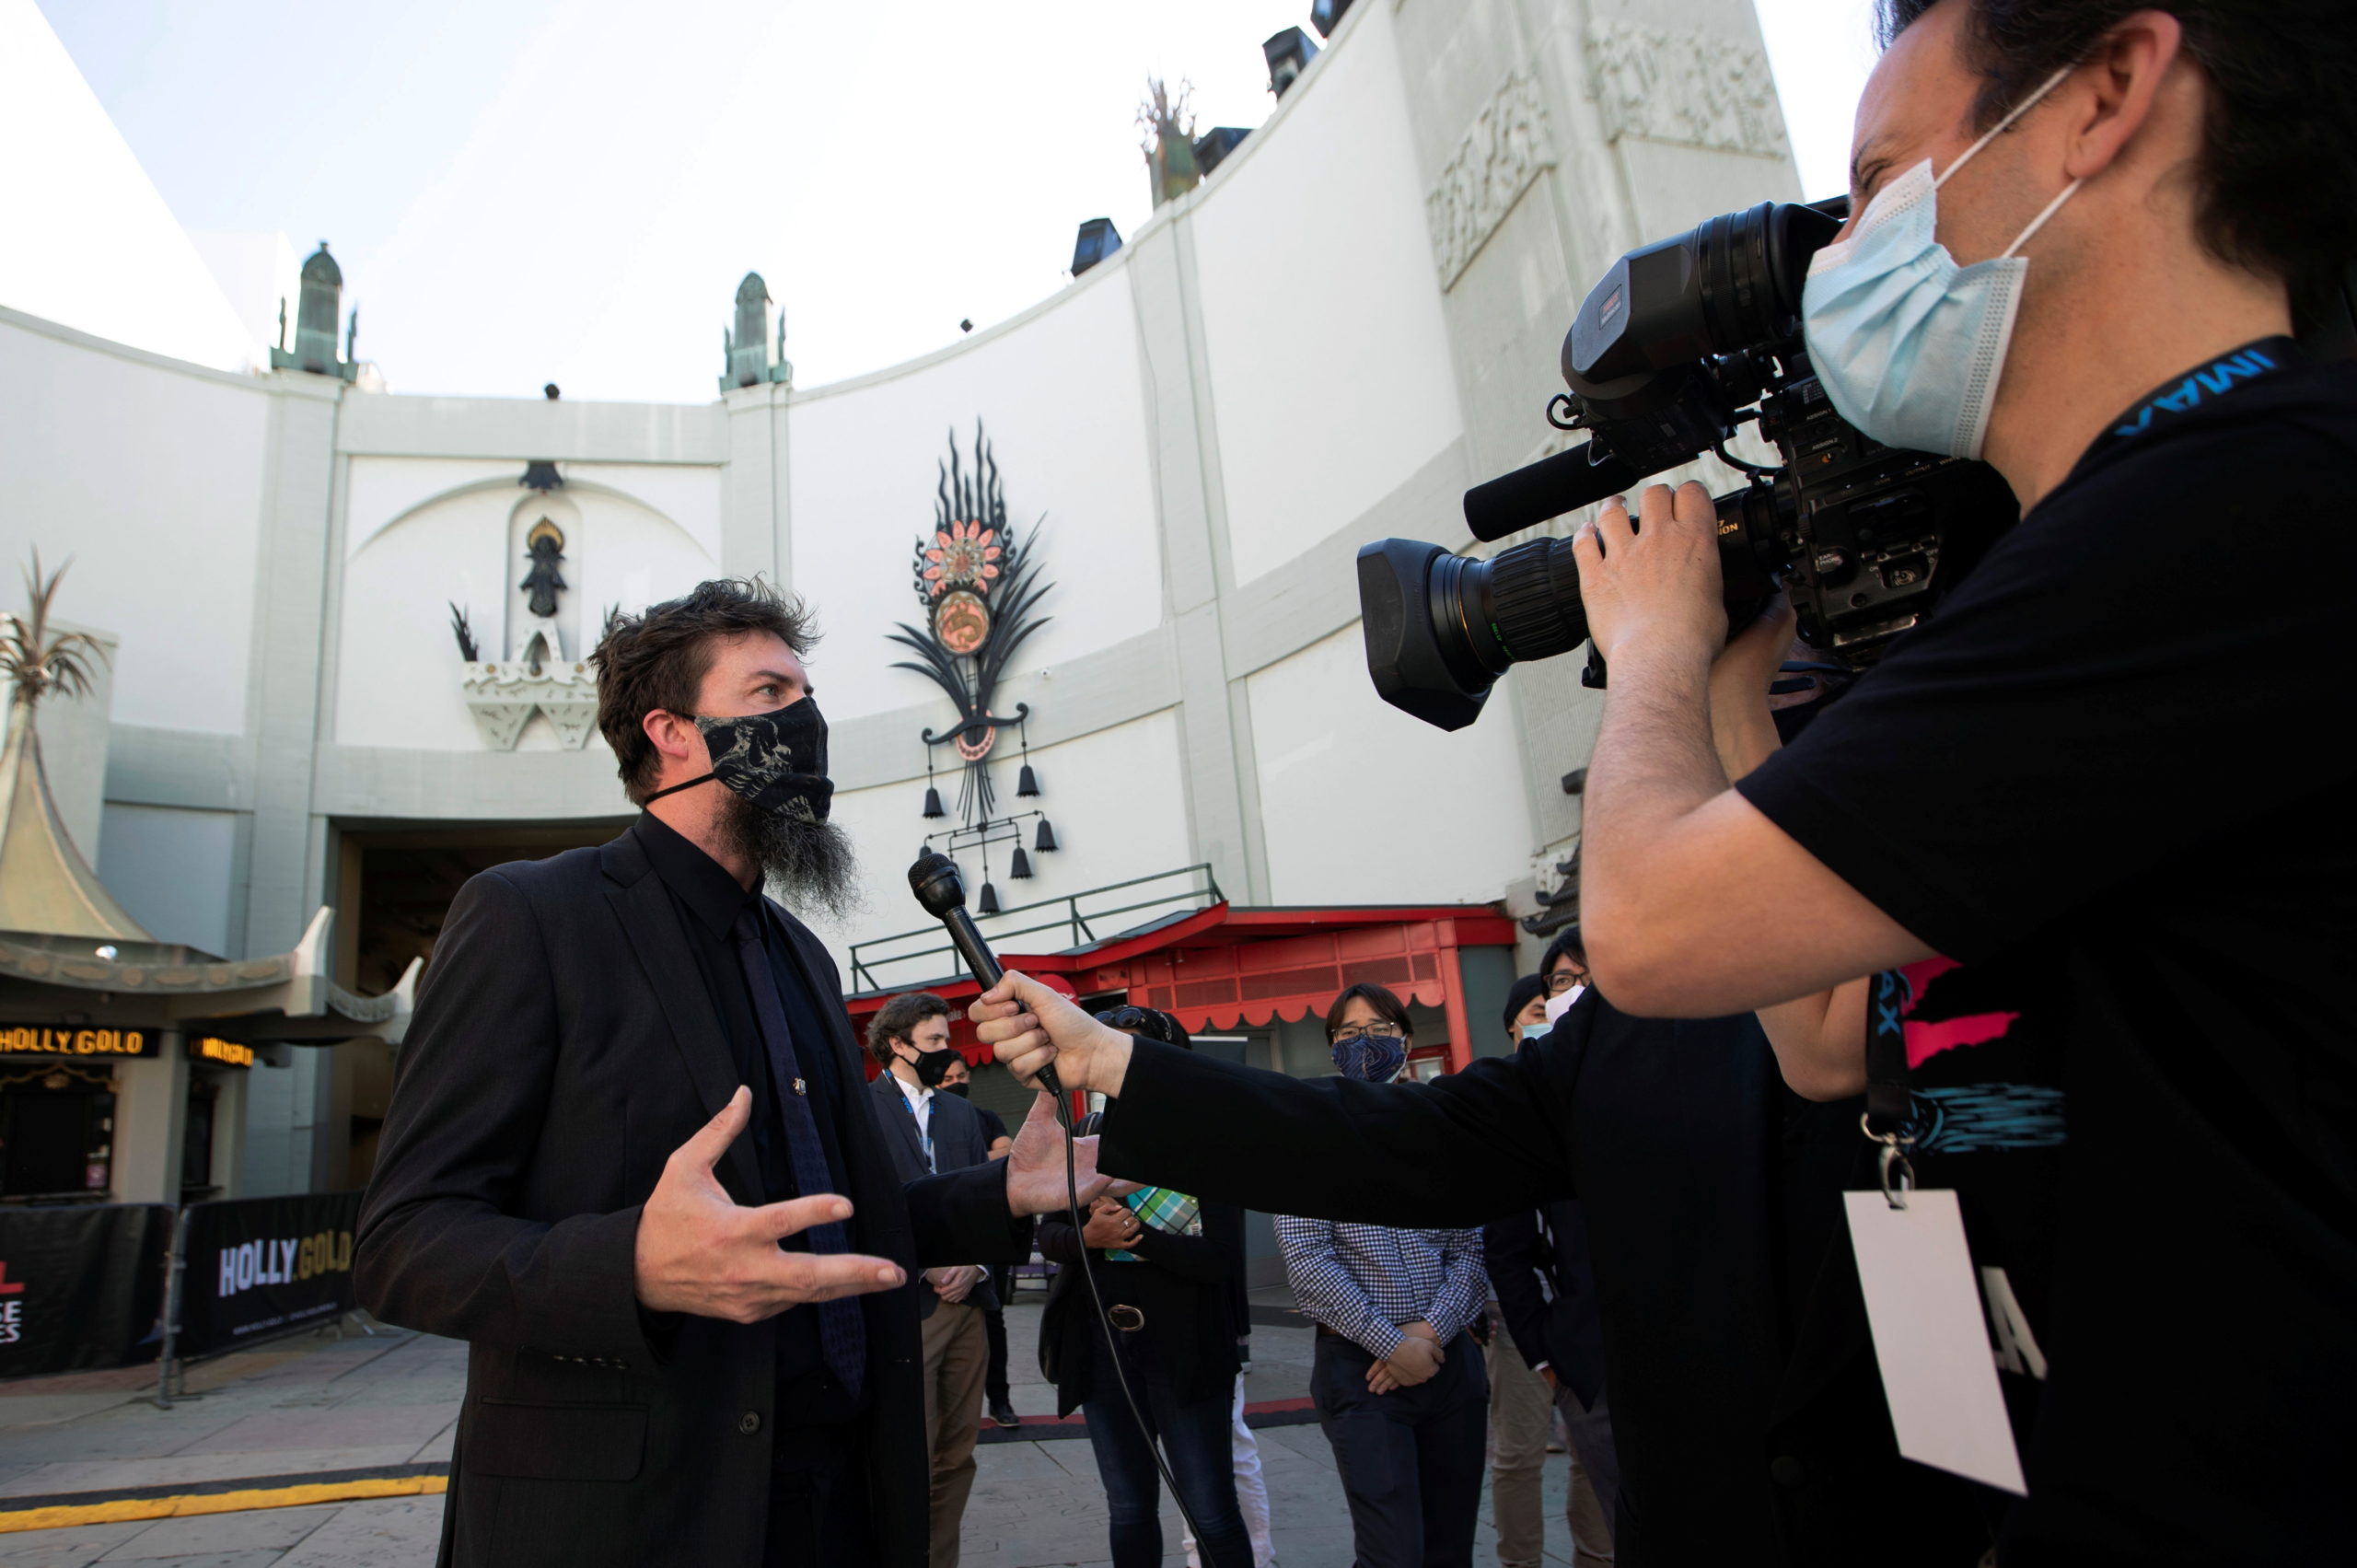 Adam Wingard, director of the upcoming movie "Godzilla vs. Kong", is interviewed at a ribbon cutting ceremony ahead of the reopening of the TCL Chinese theatre during the outbreak of the coronavirus disease (COVID-19), in Los Angeles, California, U.S., March 29, 2021. 